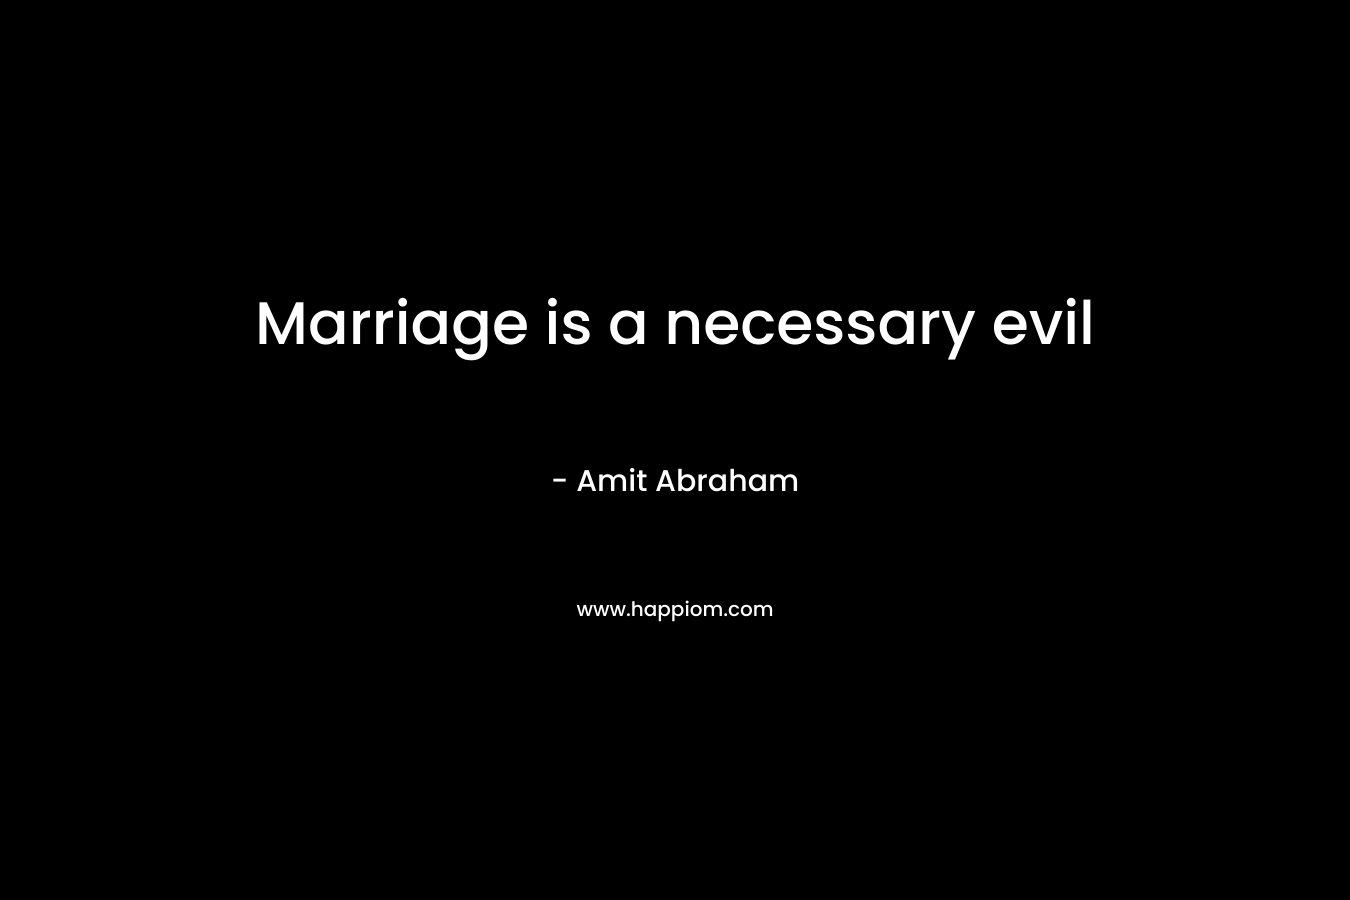 Marriage is a necessary evil